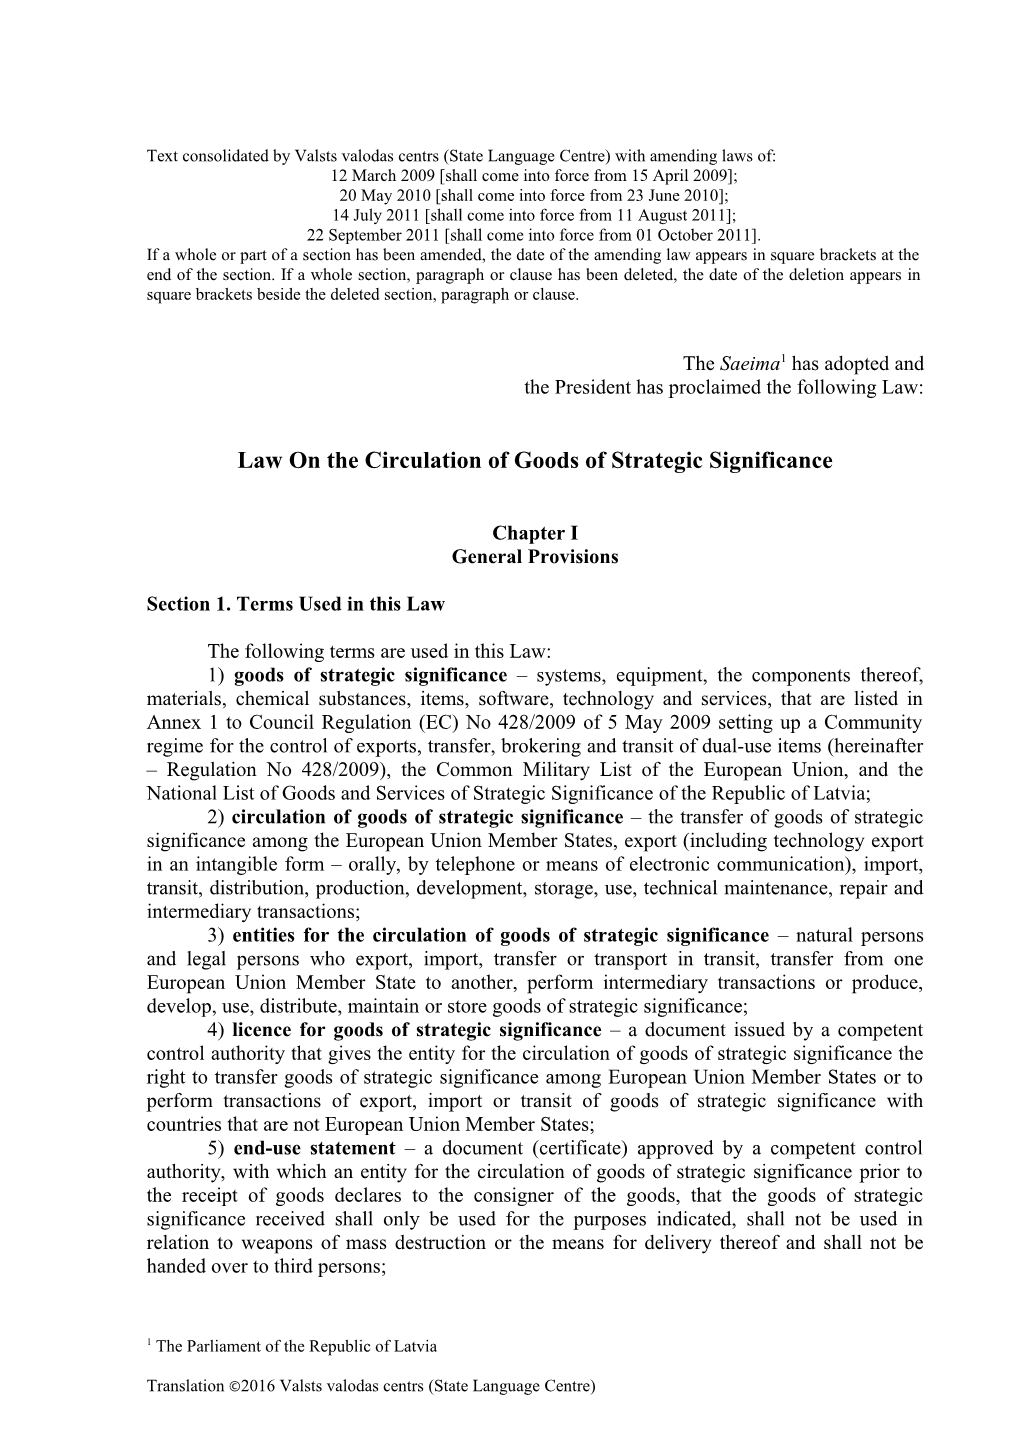 Text Consolidated by Valsts Valodas Centrs (State Language Centre) with Amending Laws Of s9